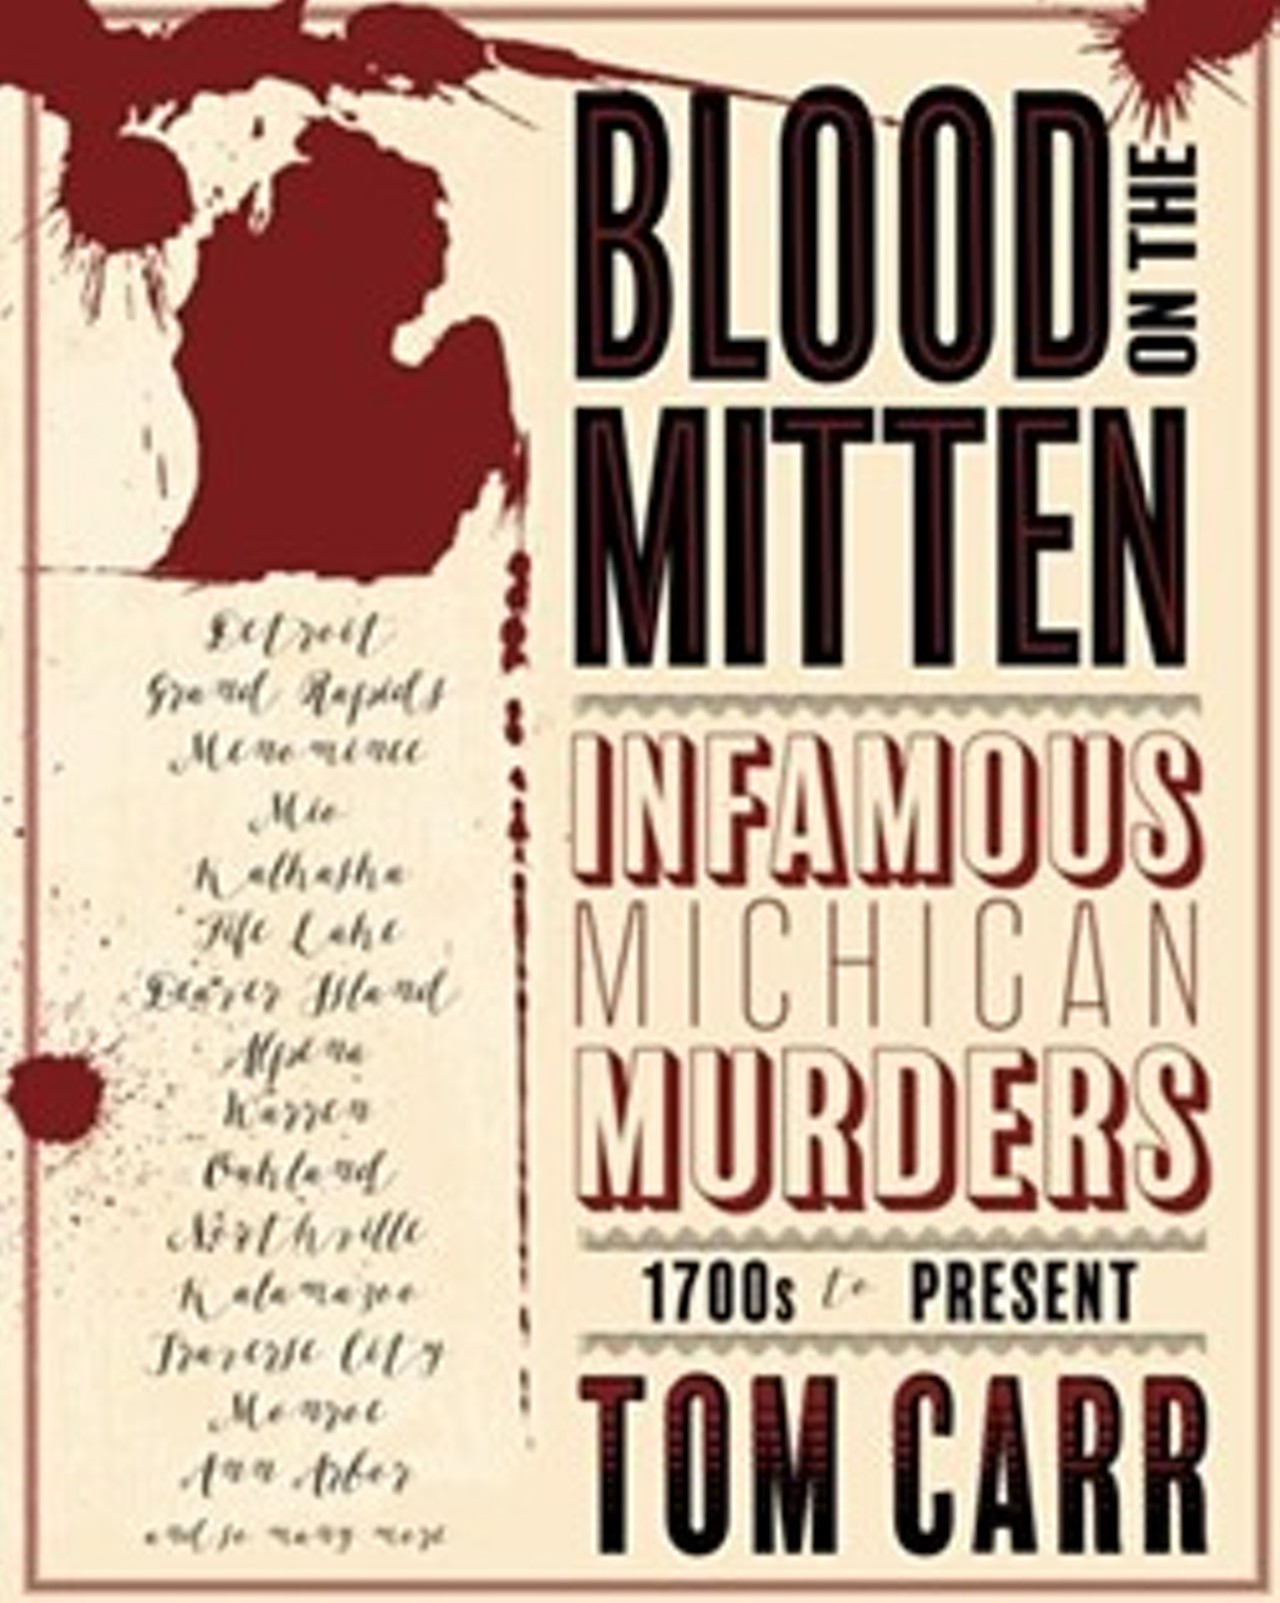 Oct. 29
Blood on the Mitten Book Tour
@ The Next Chapter Bookstore & Bistro
Author of Blood on the Mitten: Infamous Michigan Murders 1700-Present, Tom Carr, will be in Northville to promote it. The book focuses on more than 50 murders ranging from crimes of passion to calculated horrors. Carr, an award-winning journalist, not only takes readers right into the heart of these chilling tales, but also lets readers in on what happened to the community after. At the Next Chapter Bookstore & Bistro, readers will have the chance to hear Carr speak about the book and get some more insight.
141 E. Main St., Northville; 
248-465-0010; readnextchapterbooks.com